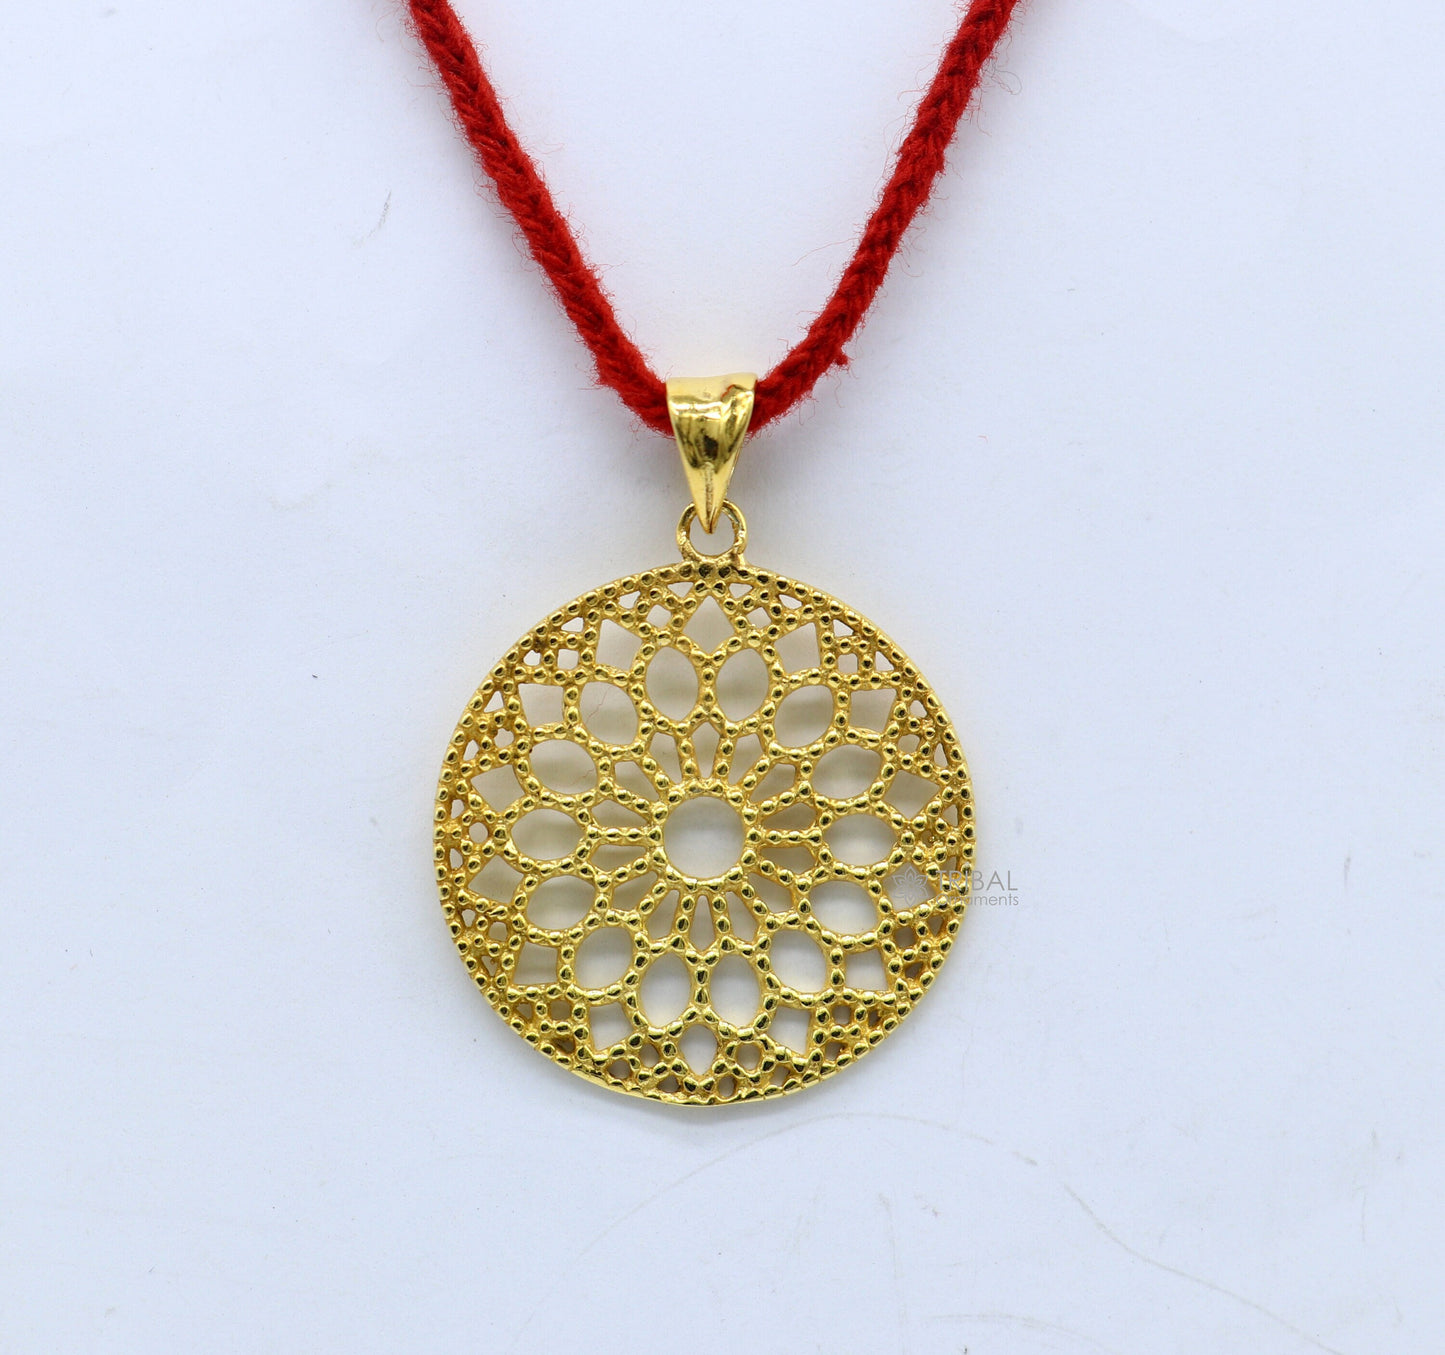 925 sterling silver handmade stylish round floral design small gold polished or vermilled pendant best gifting jewelry from india nsp614 - TRIBAL ORNAMENTS